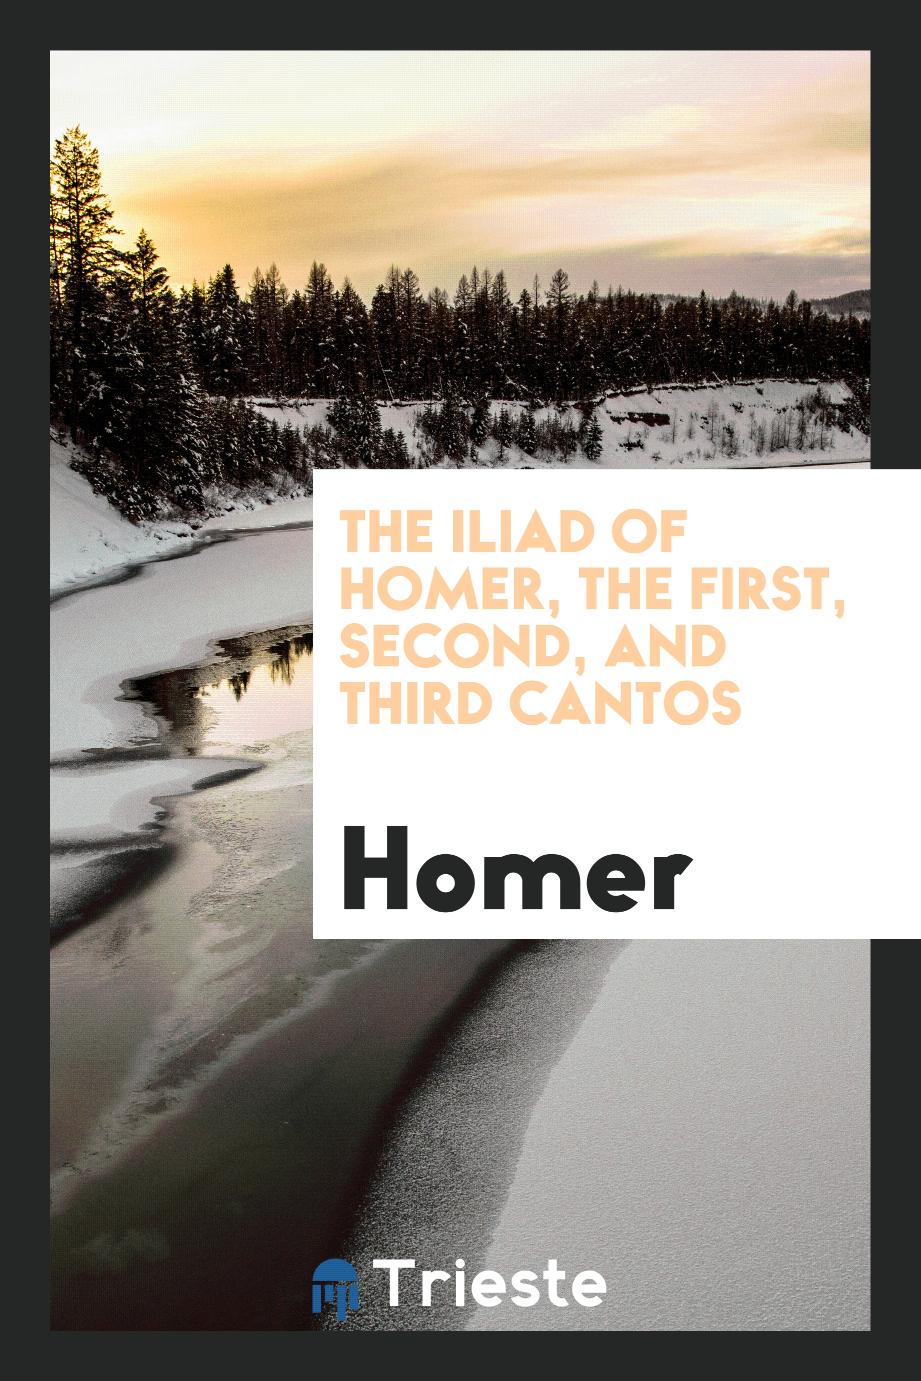 The Iliad of Homer, the first, second, and third cantos